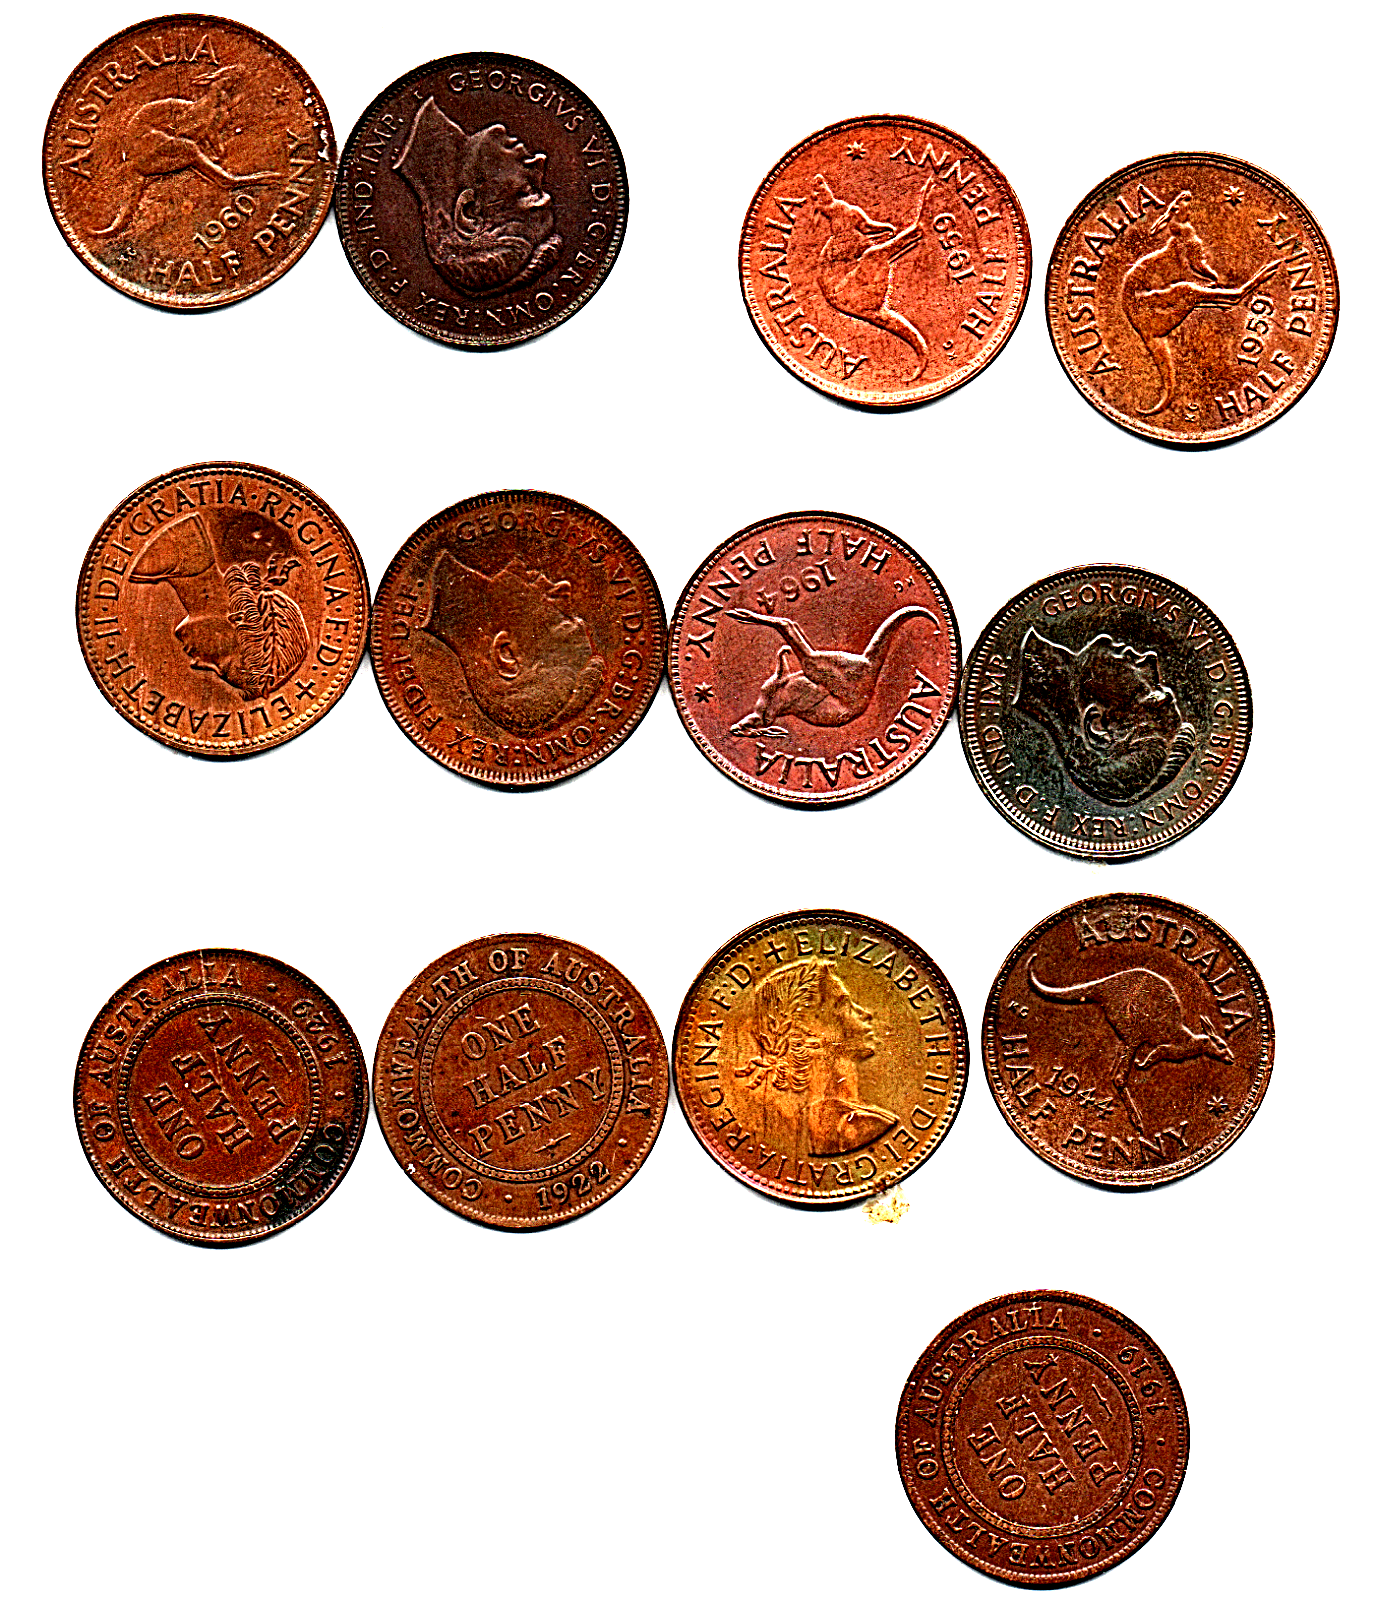 15 AUSTRALIA HALF PENNY COINS - TWO ARE IN VERY NICE CONDITION